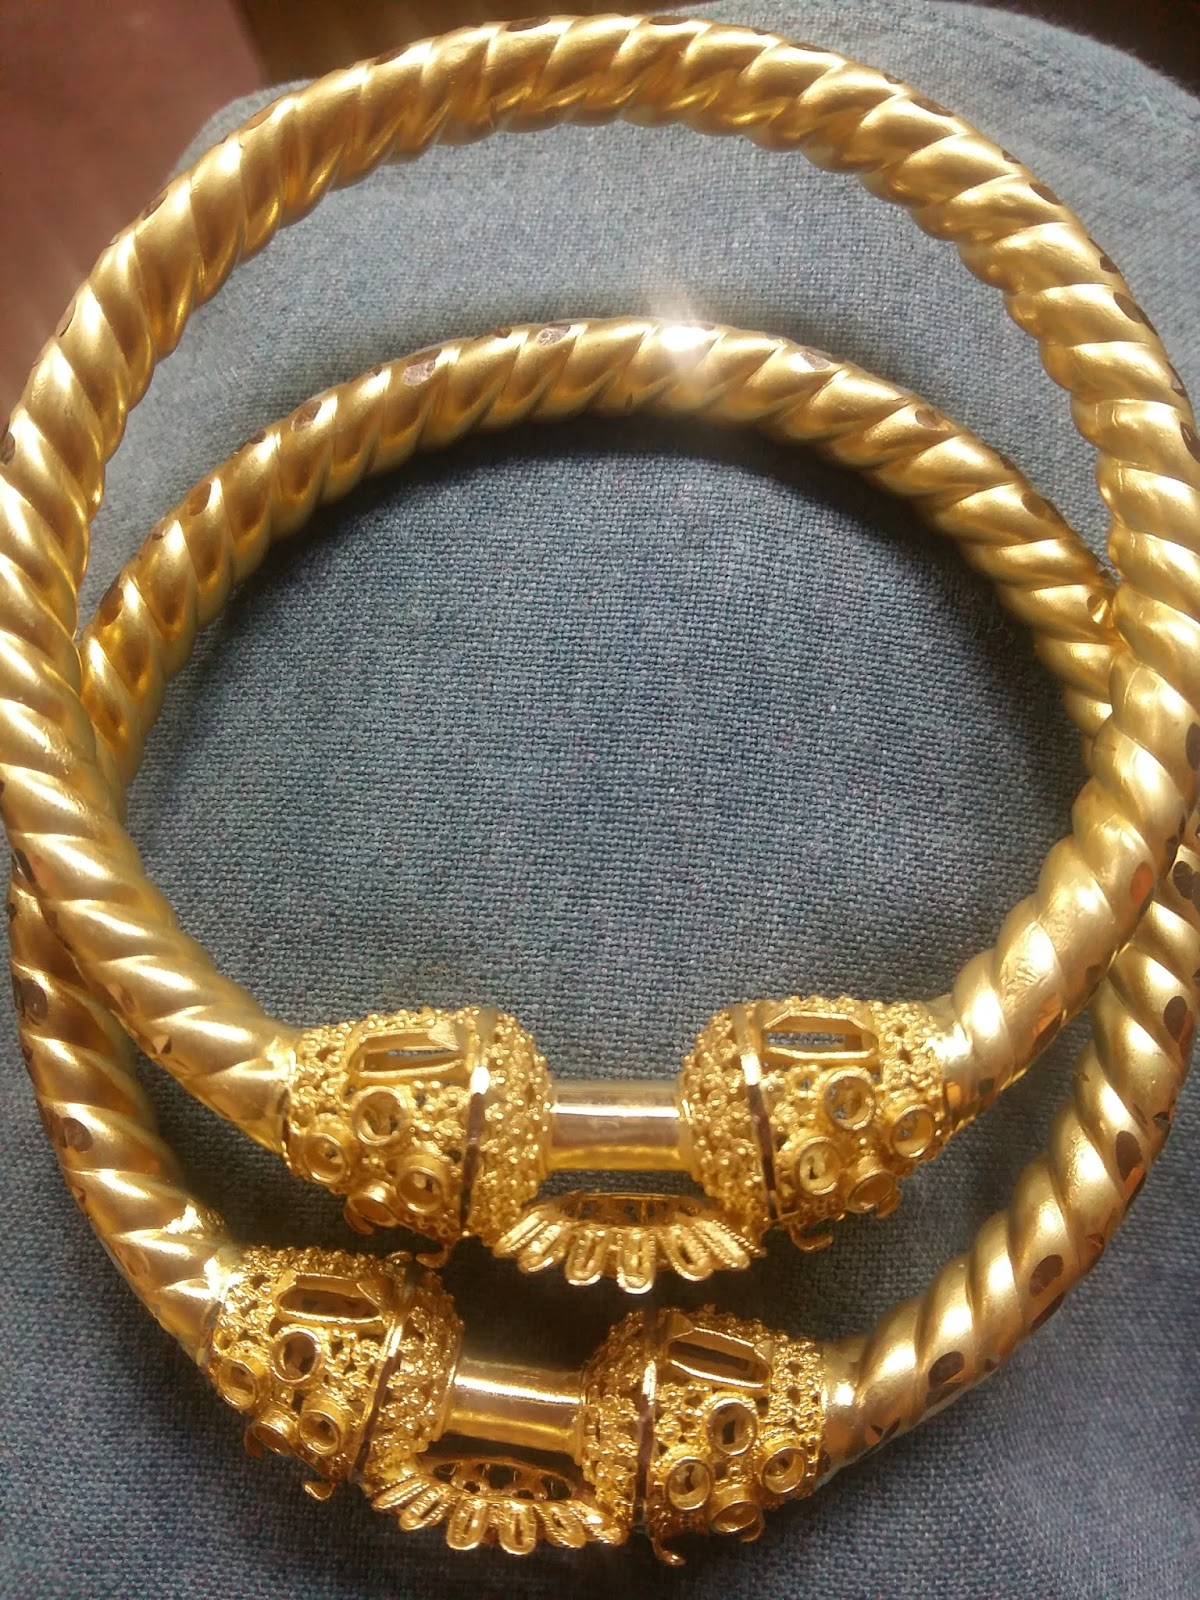 Gold Bangles : Solid Gold Bangle With Stone Style